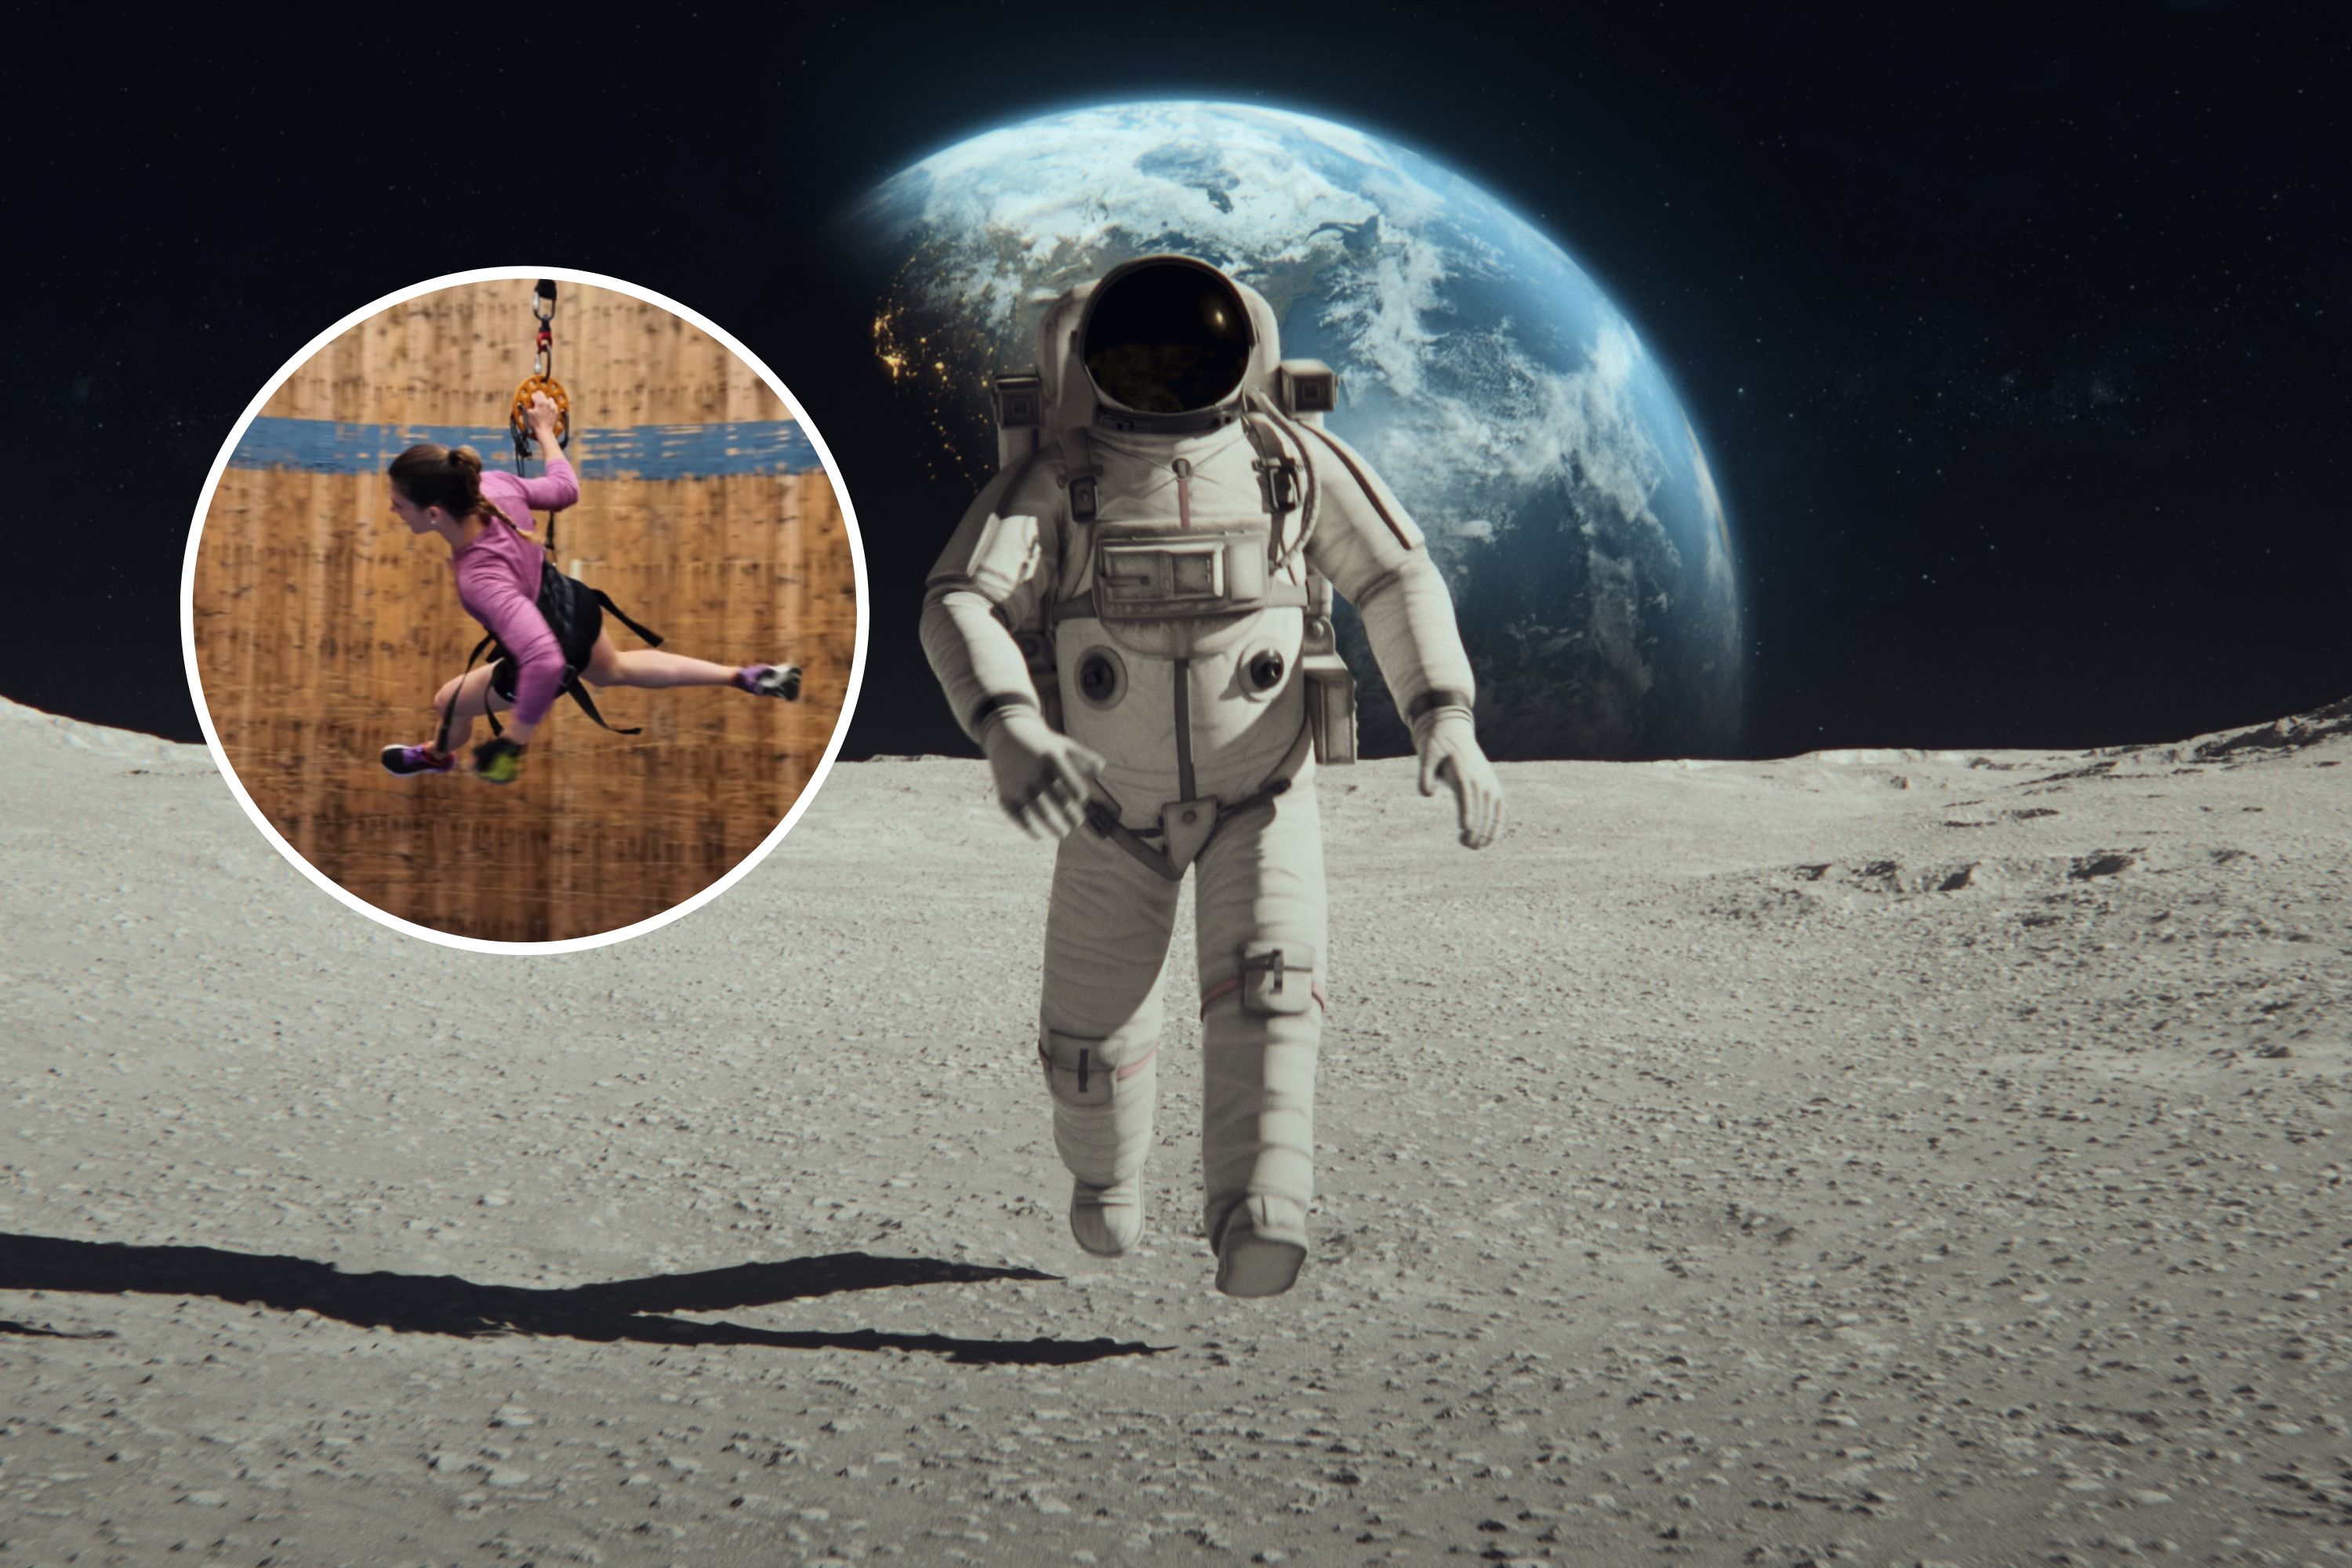 Scientists reveal the weird way astronauts could stay fit on the moon